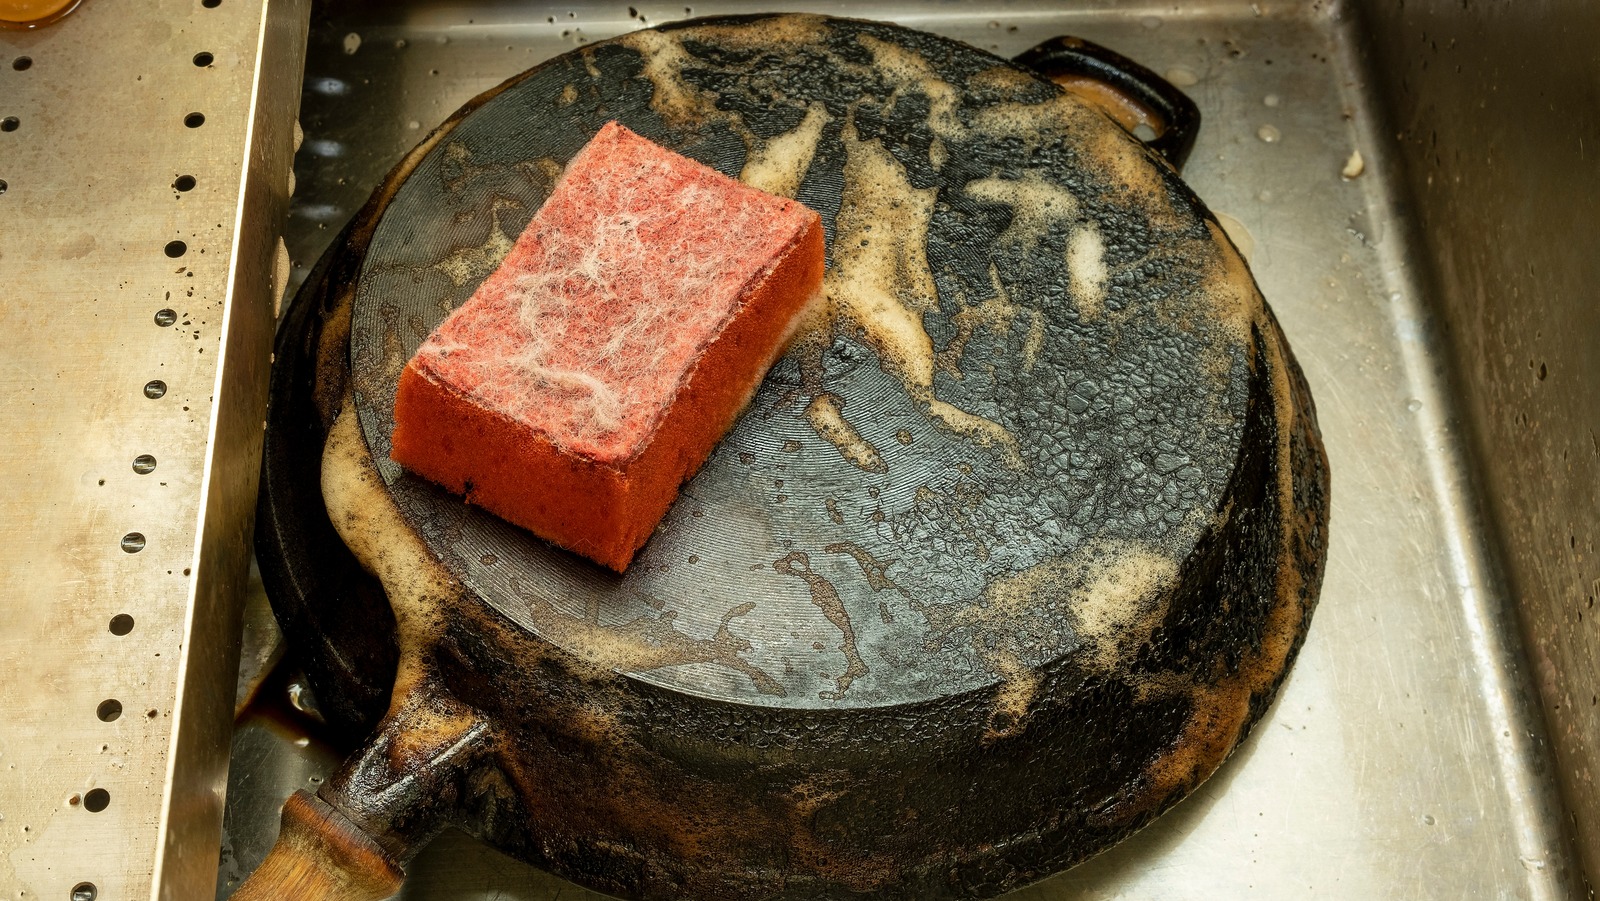 https://www.thedailymeal.com/img/gallery/why-its-so-important-to-keep-your-cast-iron-clean/l-intro-1675261218.jpg